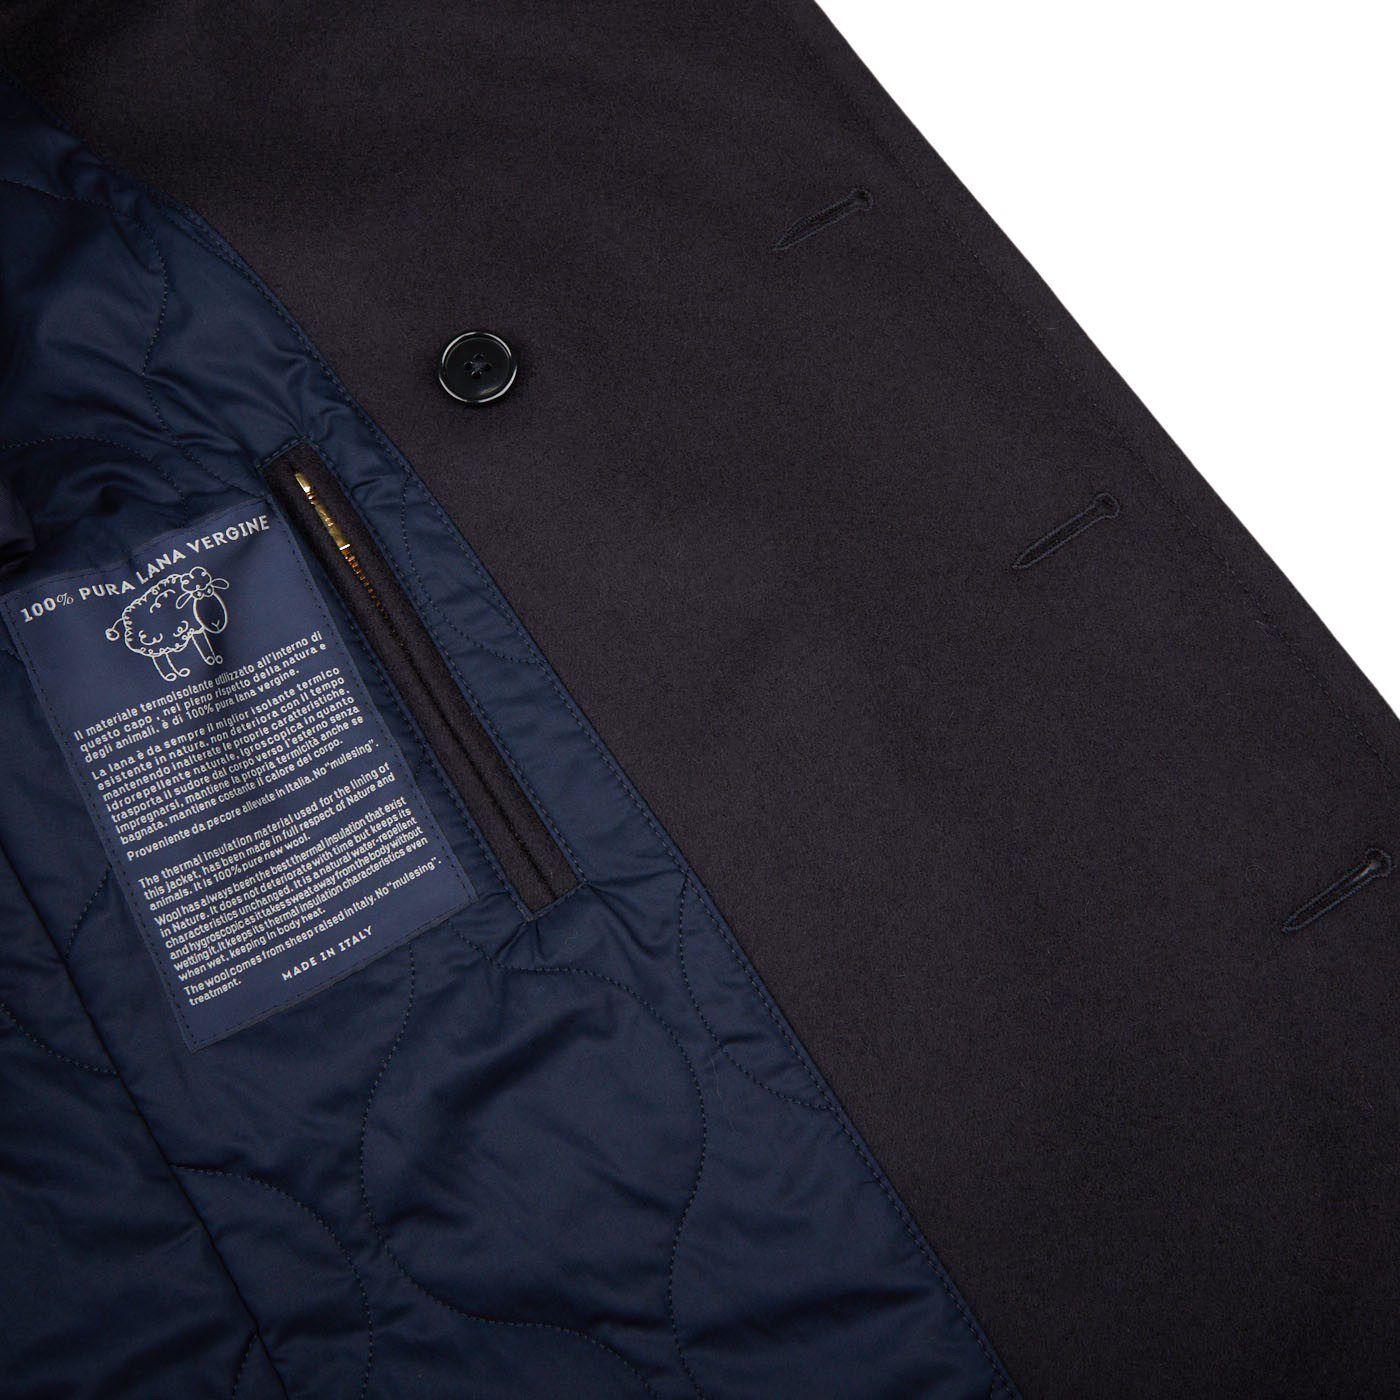 The back of a Navy Blue Heavy Wool Casentino Peacoat with a Manifattura Ceccarelli label on it.